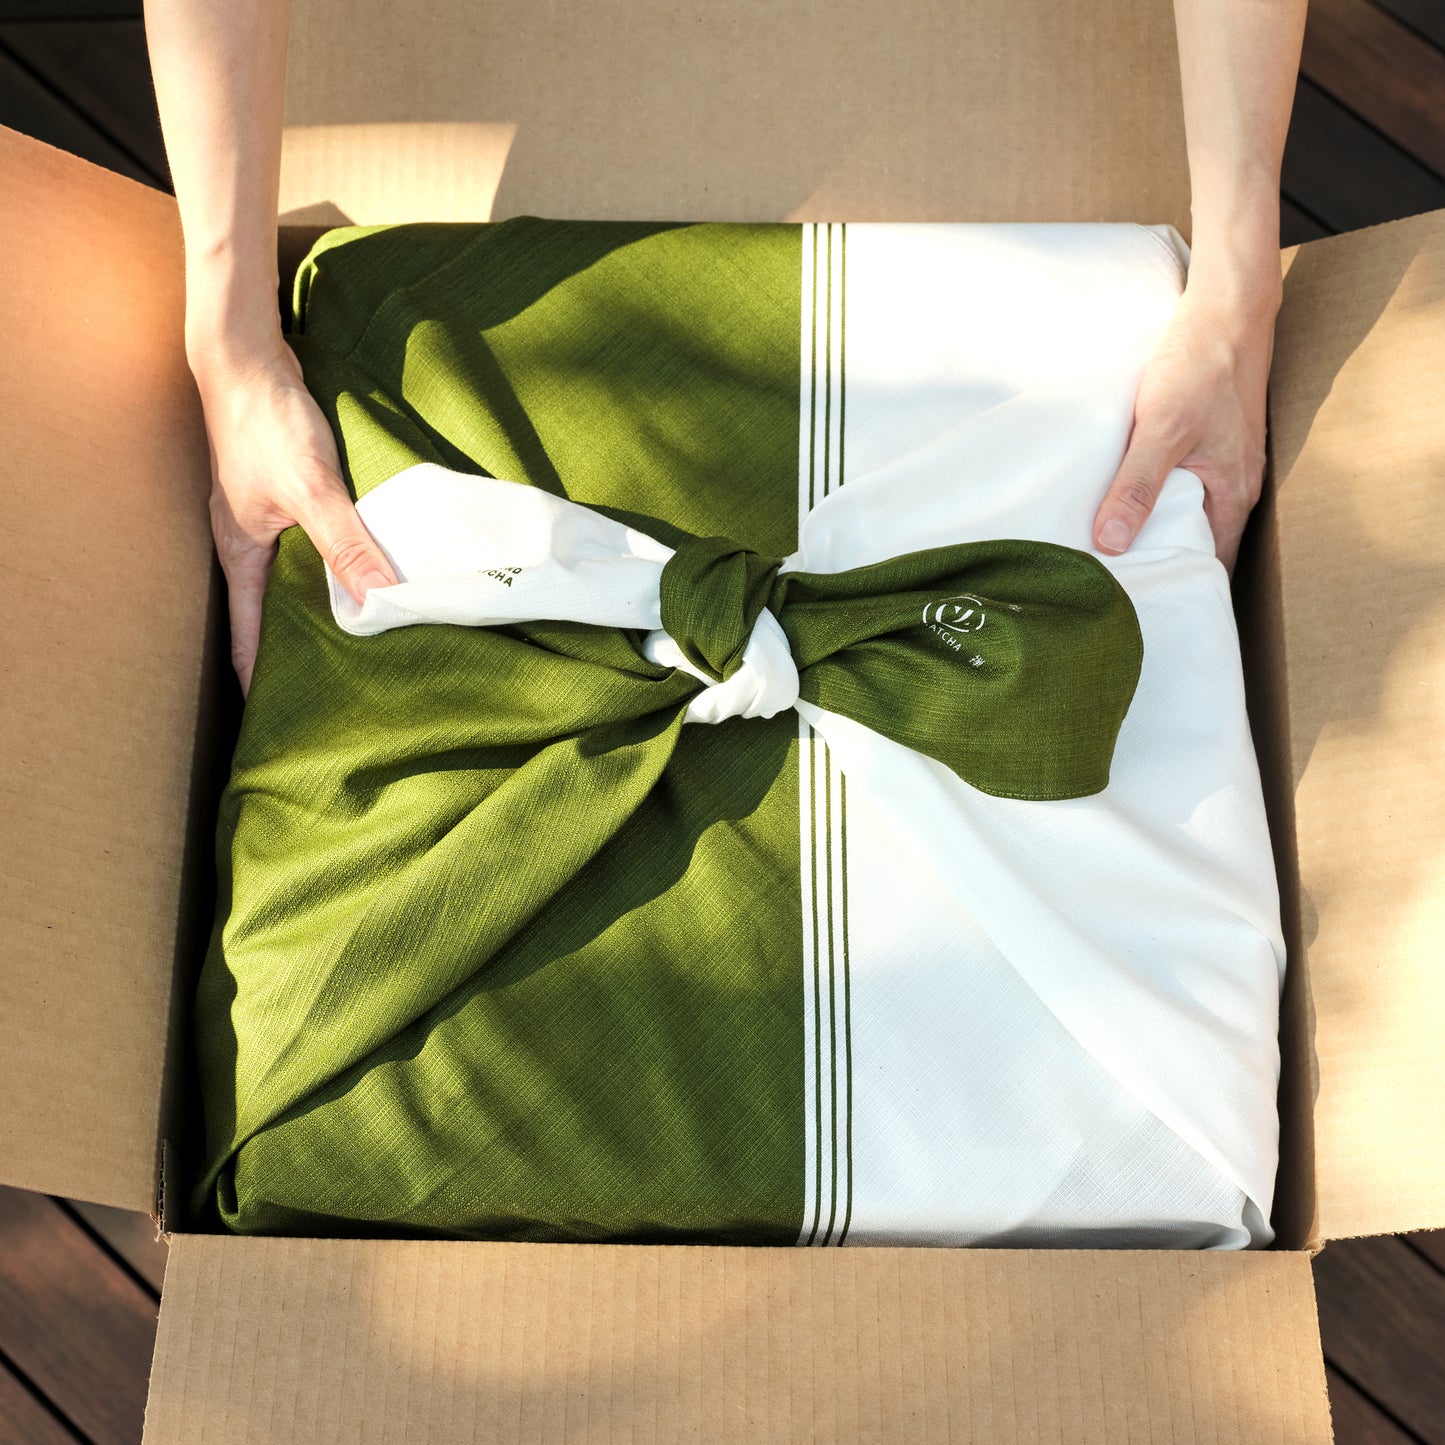 Two hands pull the Matcha Maker Gift Starter Kit, wrapped in the traditional style with a furoshiki wrap, out of a box.